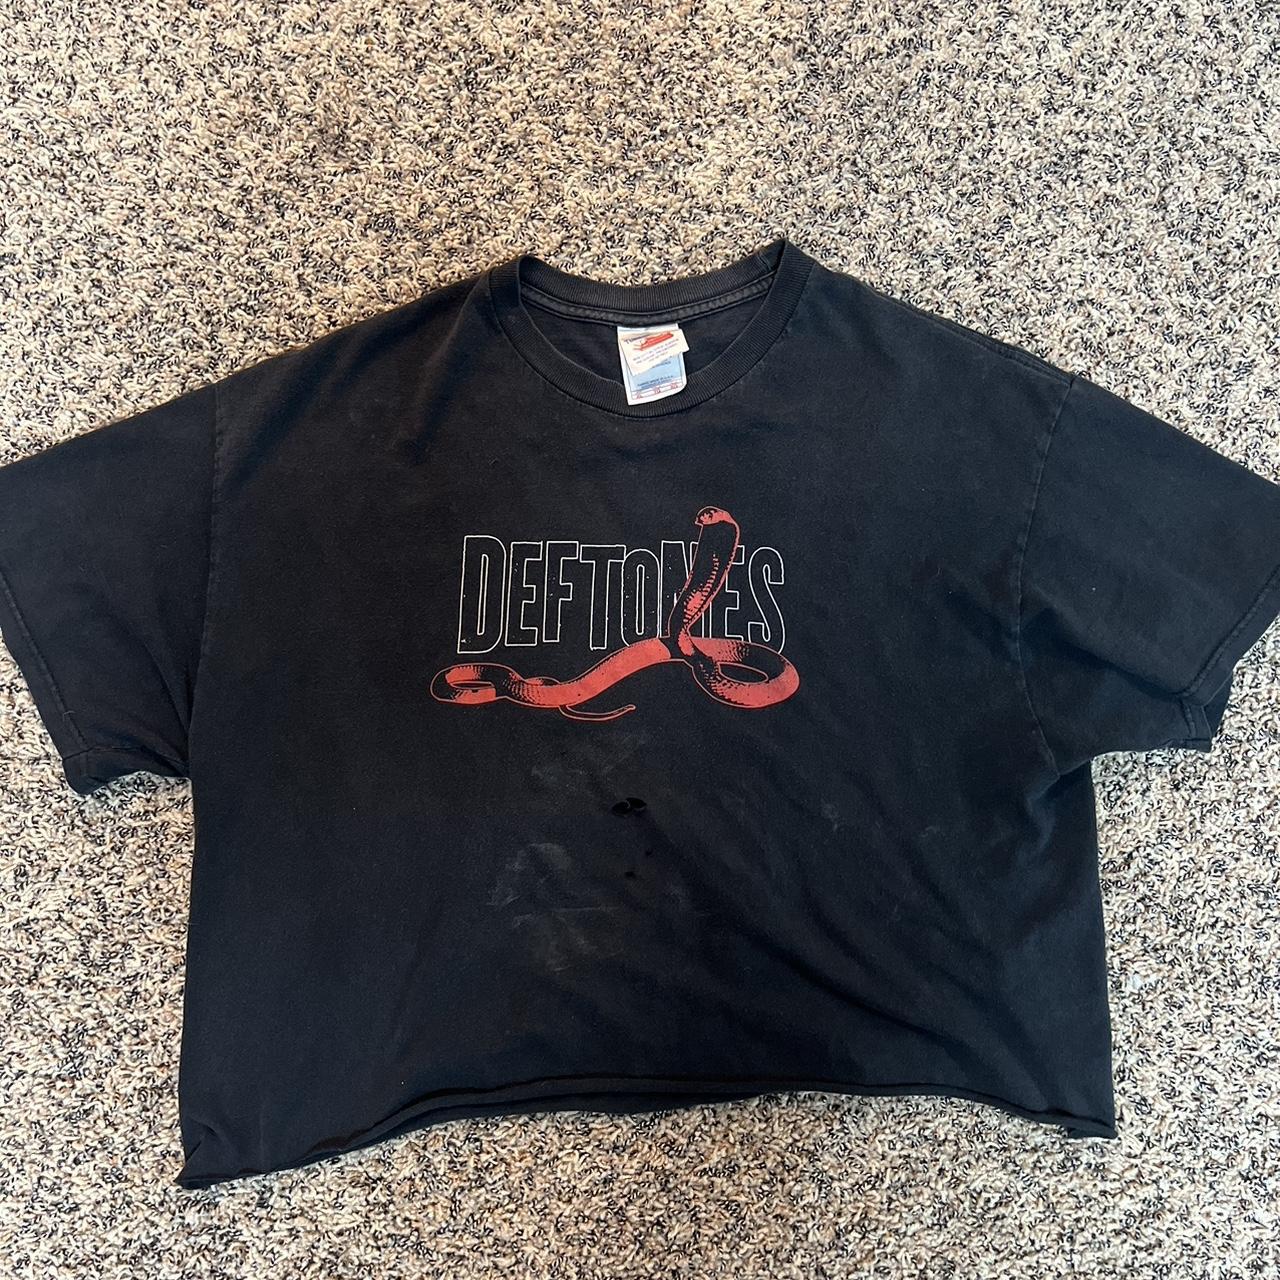 Deftones tee , Tennessee river tag very insane find